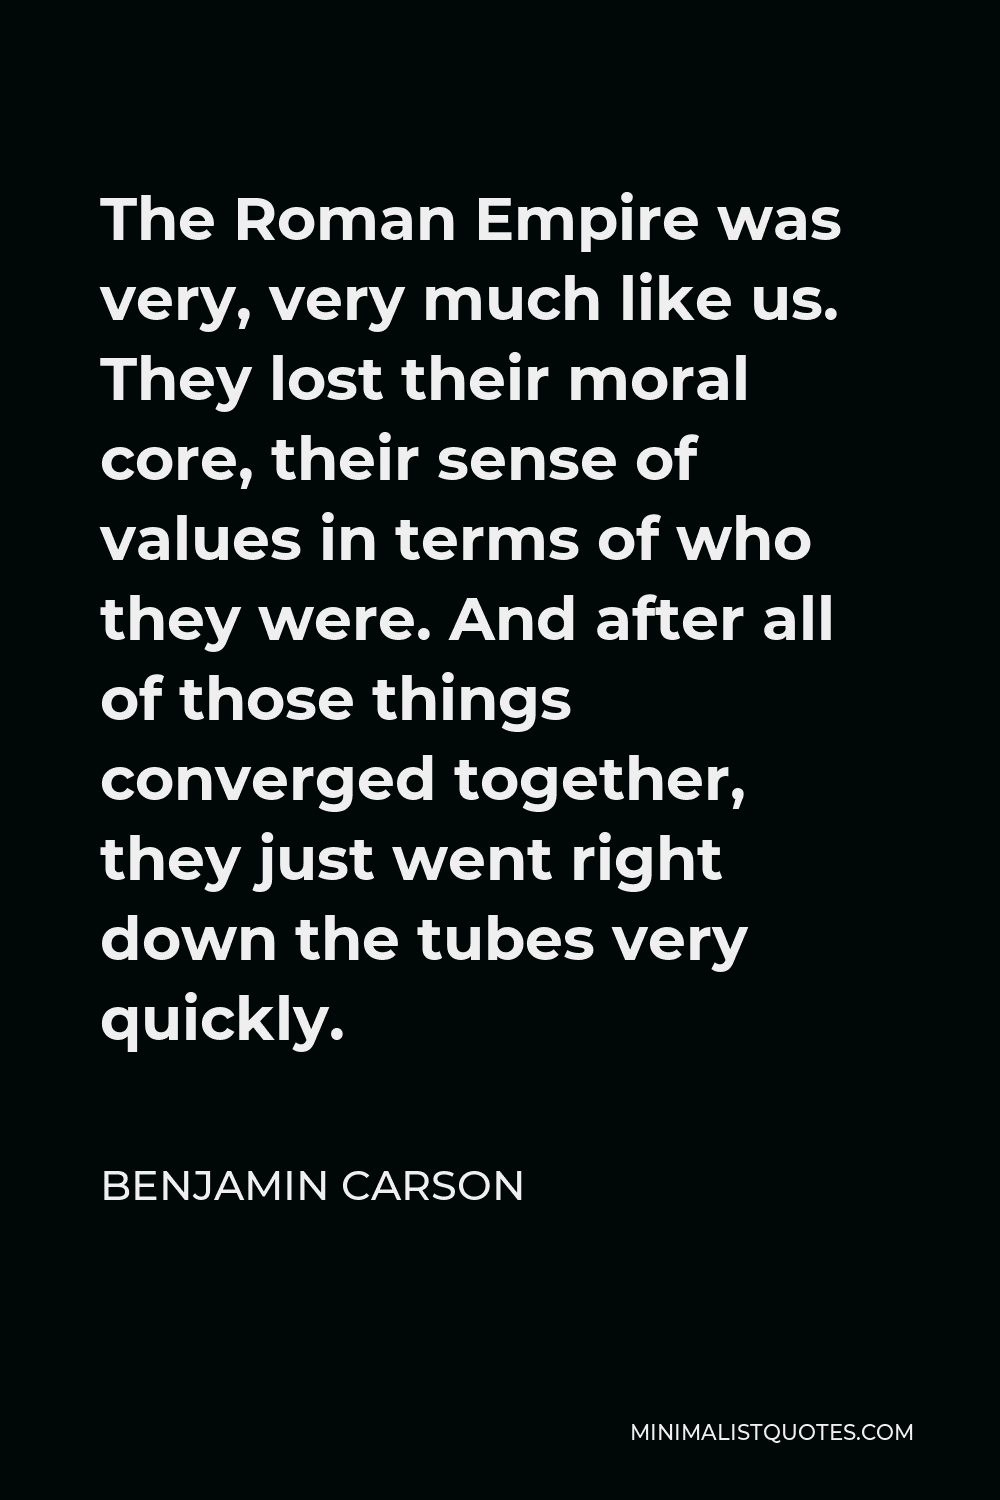 Benjamin Carson Quote - The Roman Empire was very, very much like us. They lost their moral core, their sense of values in terms of who they were. And after all of those things converged together, they just went right down the tubes very quickly.